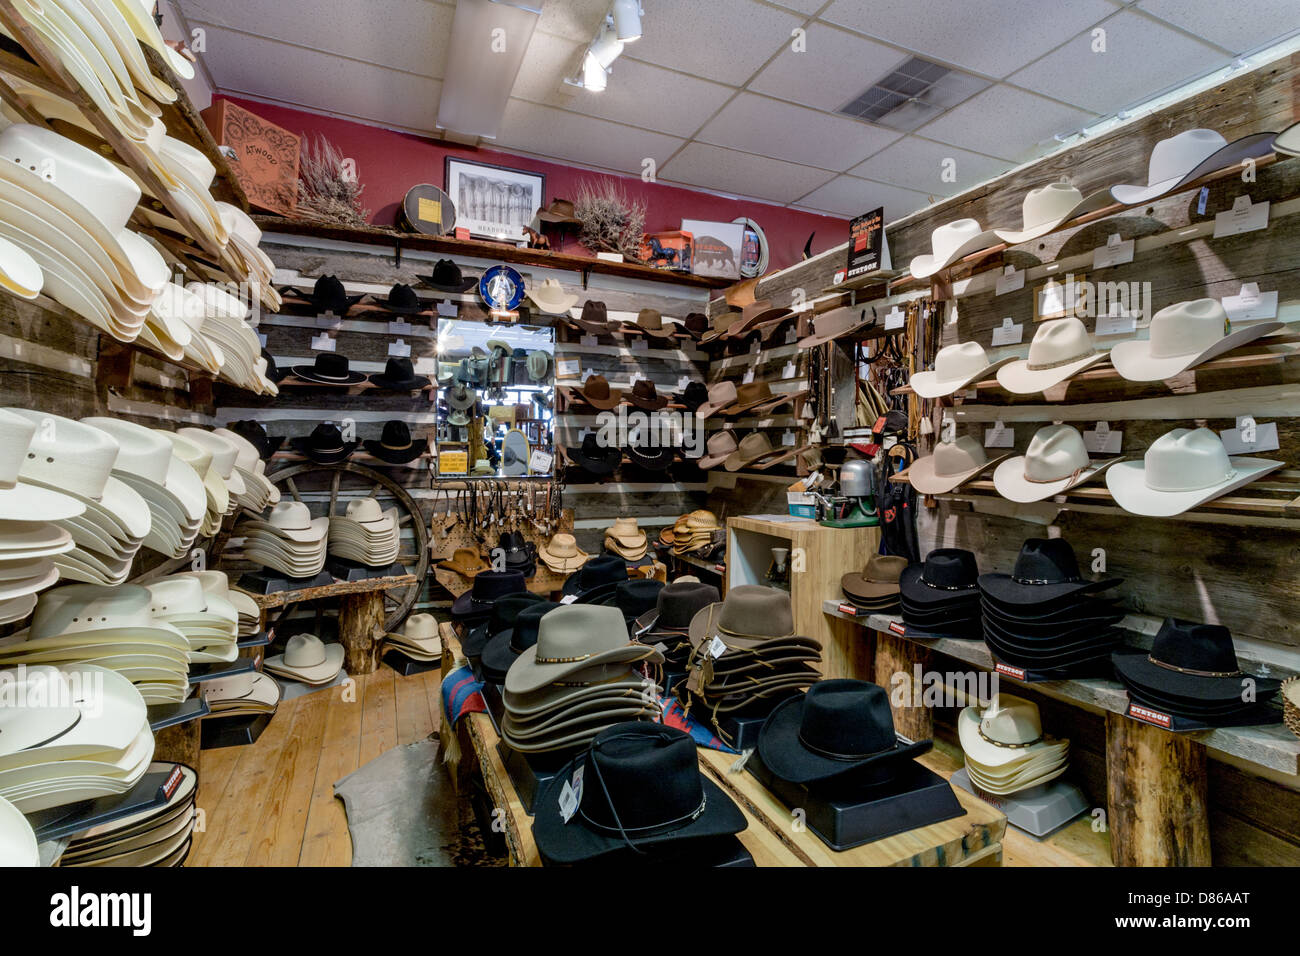 Western Store High Resolution Stock Photography and Images - Alamy